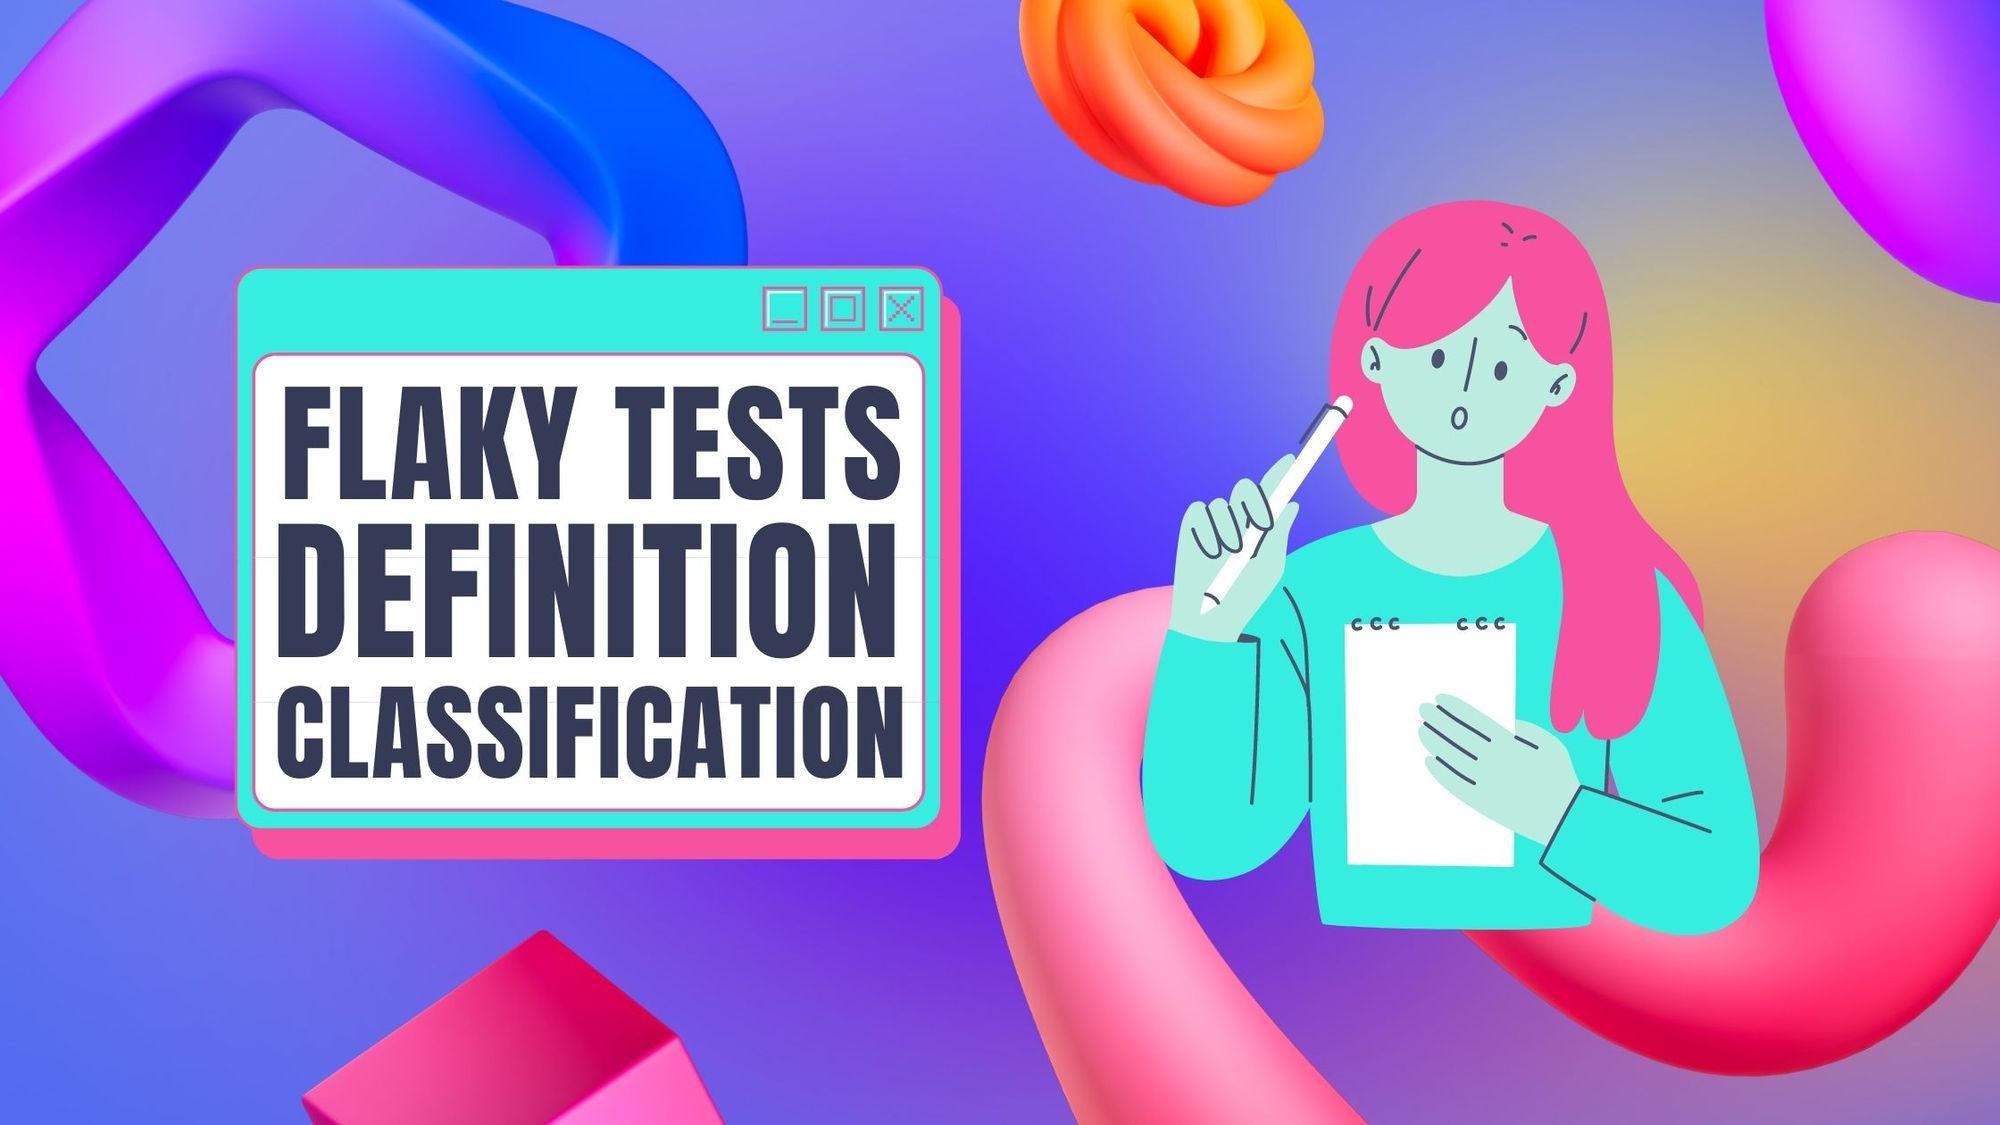 Flaky tests: what are they and how to classify them?